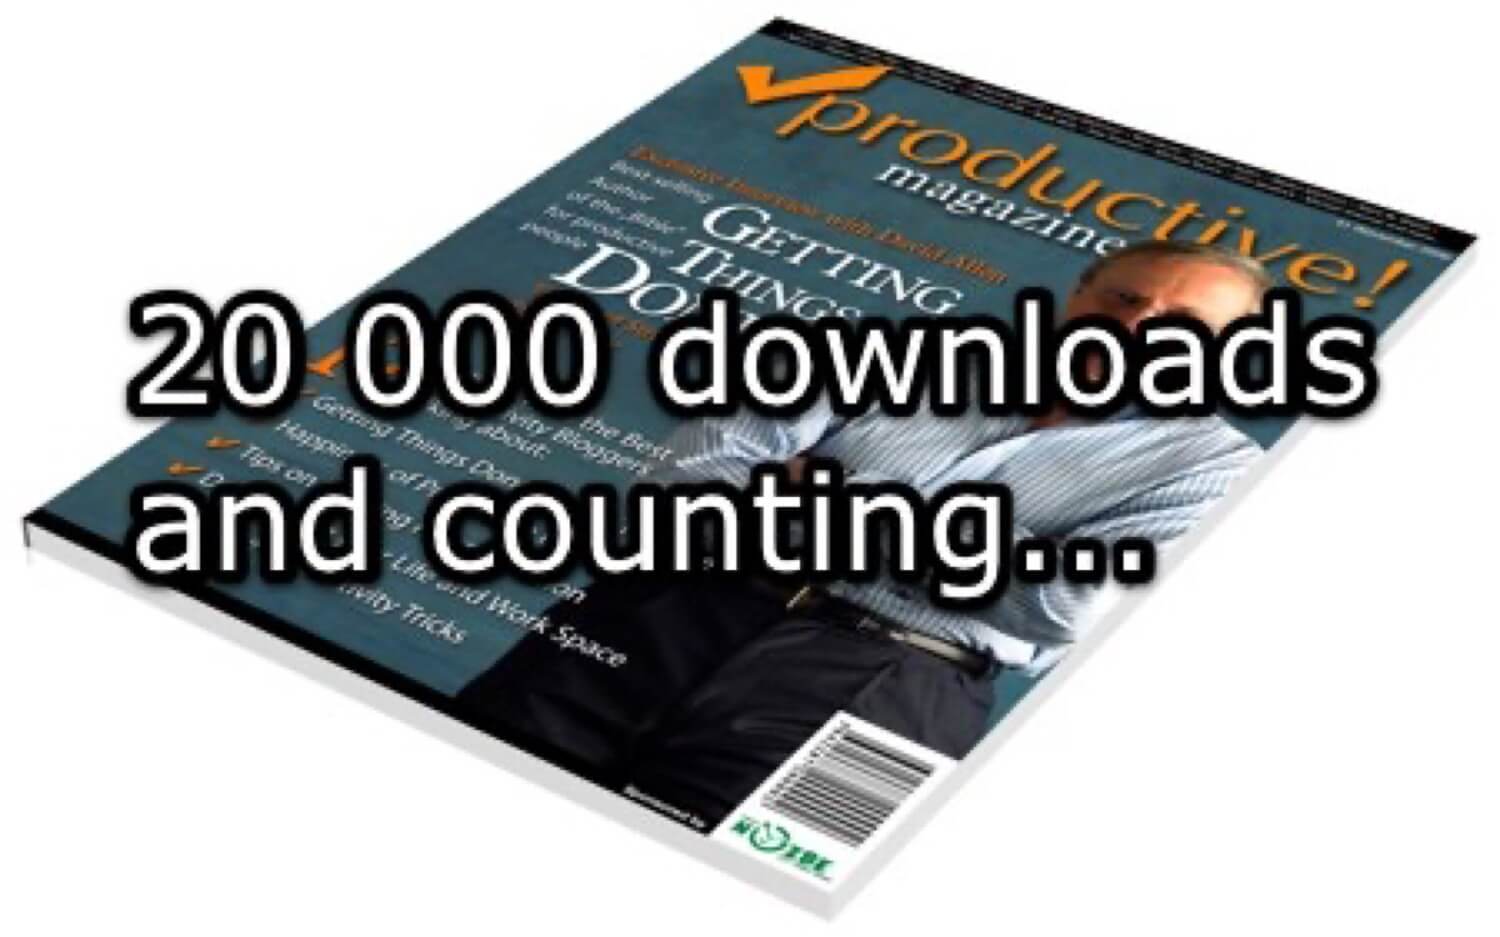 20 000 downloads in the first week. I’m psyched!